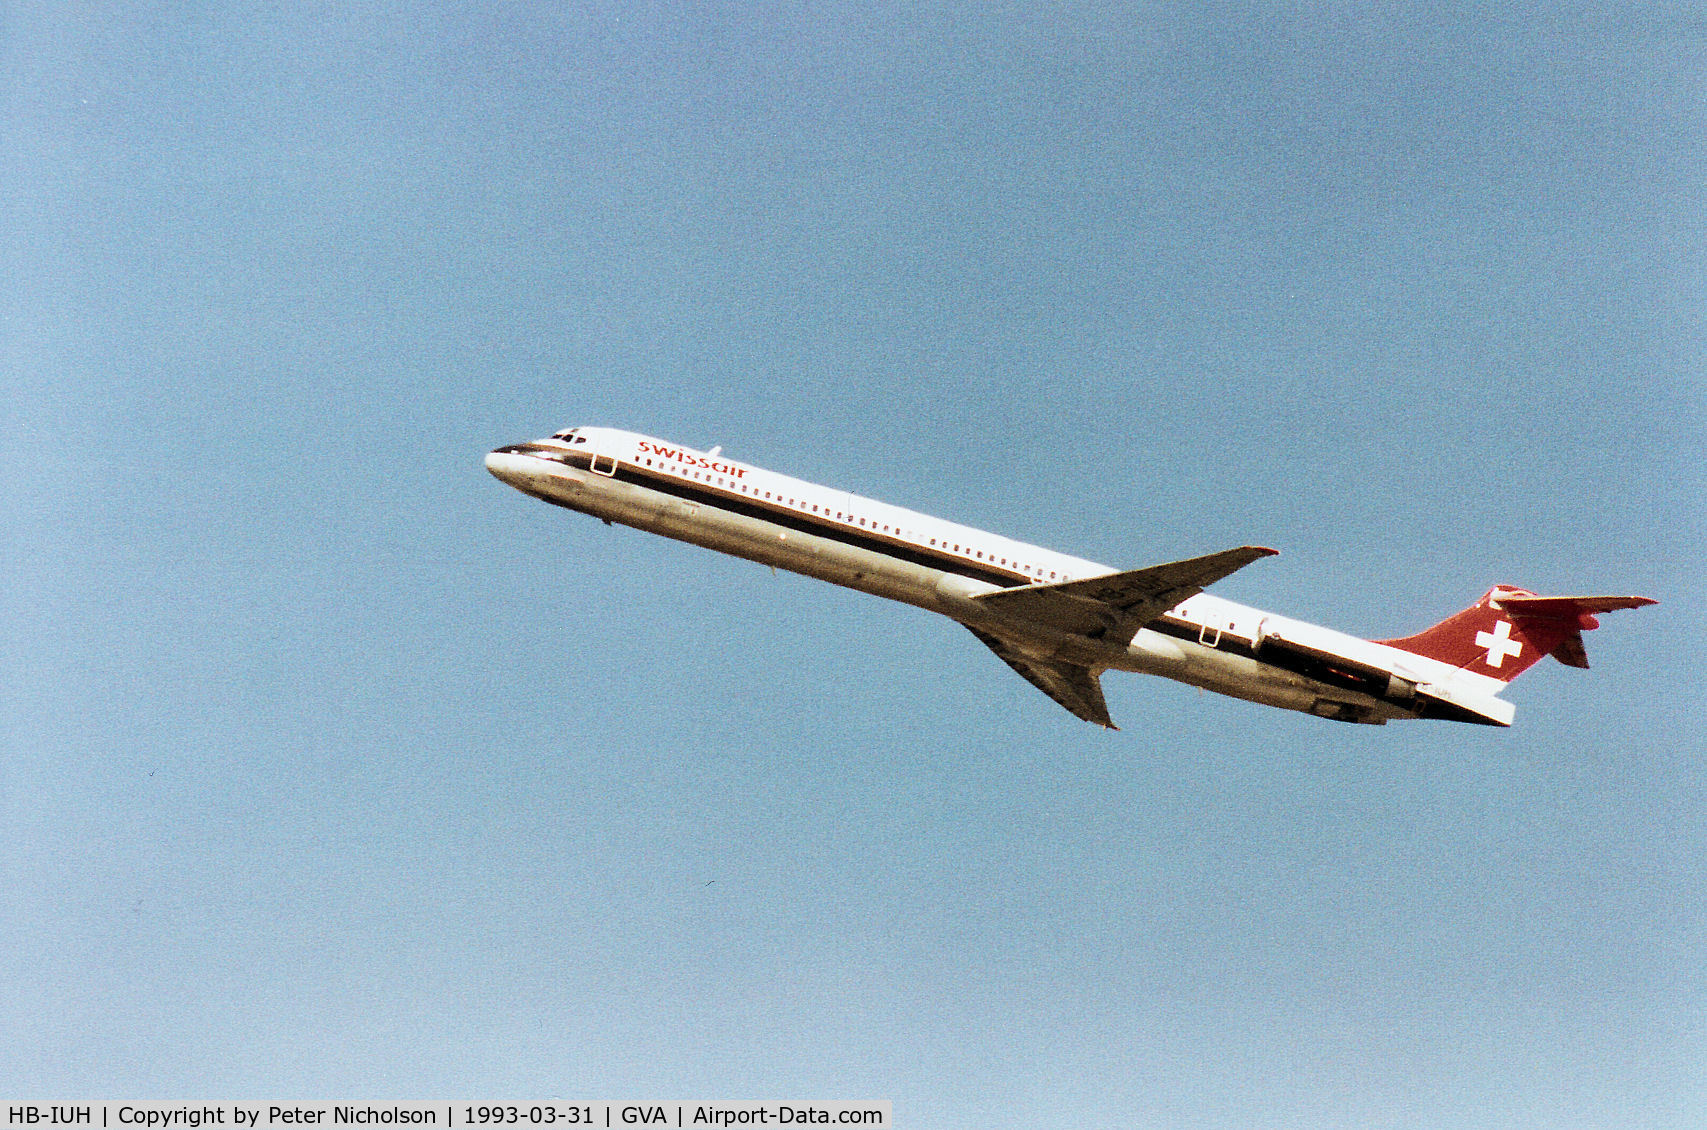 HB-IUH, 1991 McDonnell Douglas MD-83 (DC-9-83) C/N 53150, Swissair MD-83 clikmbing out of Geneva in March 1993.